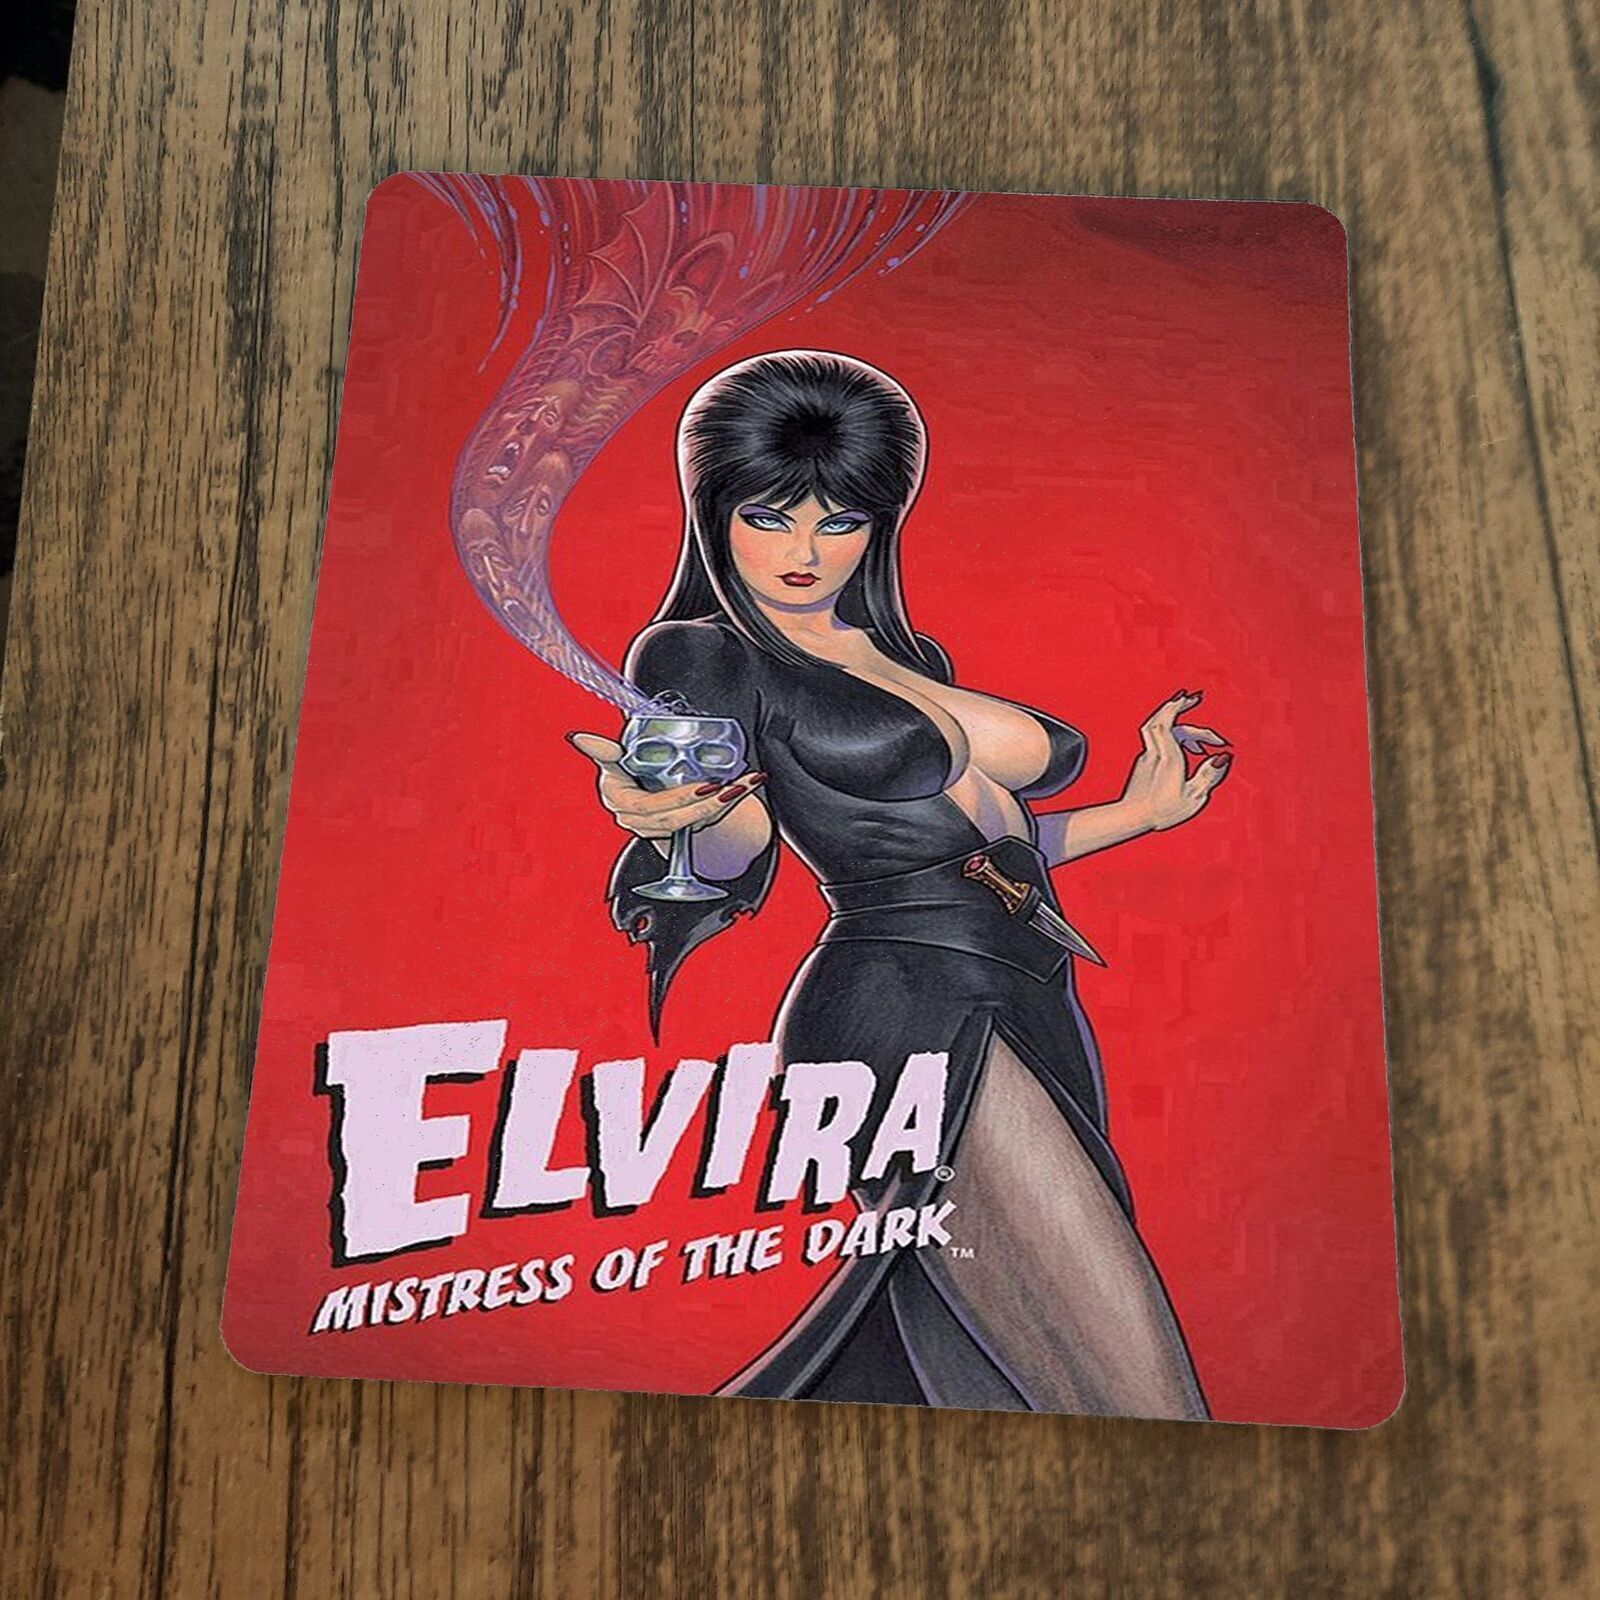 Red Elvira Mistress of the Dark Mouse Pad